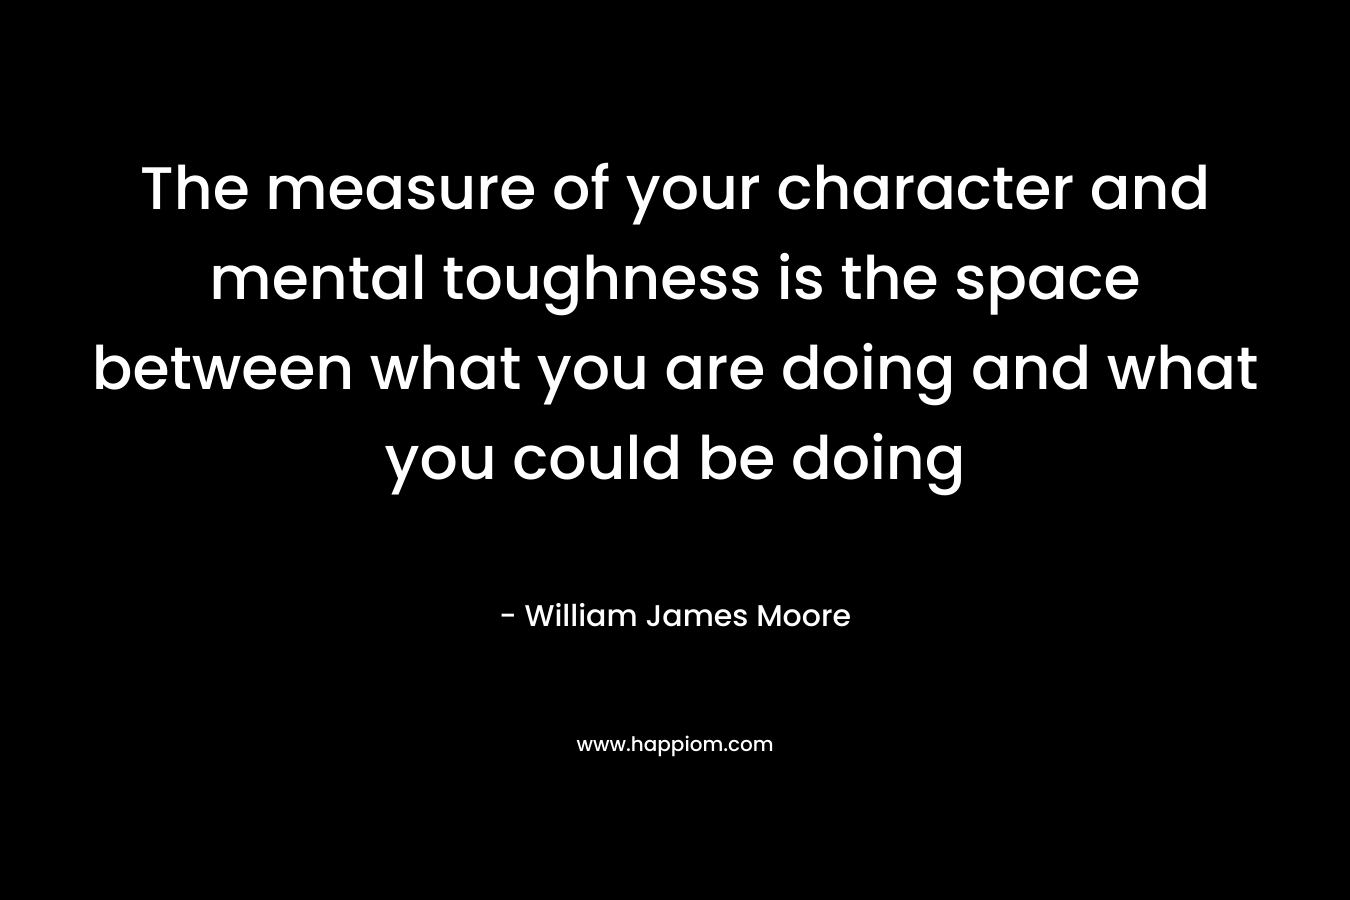 The measure of your character and mental toughness is the space between what you are doing and what you could be doing – William James Moore